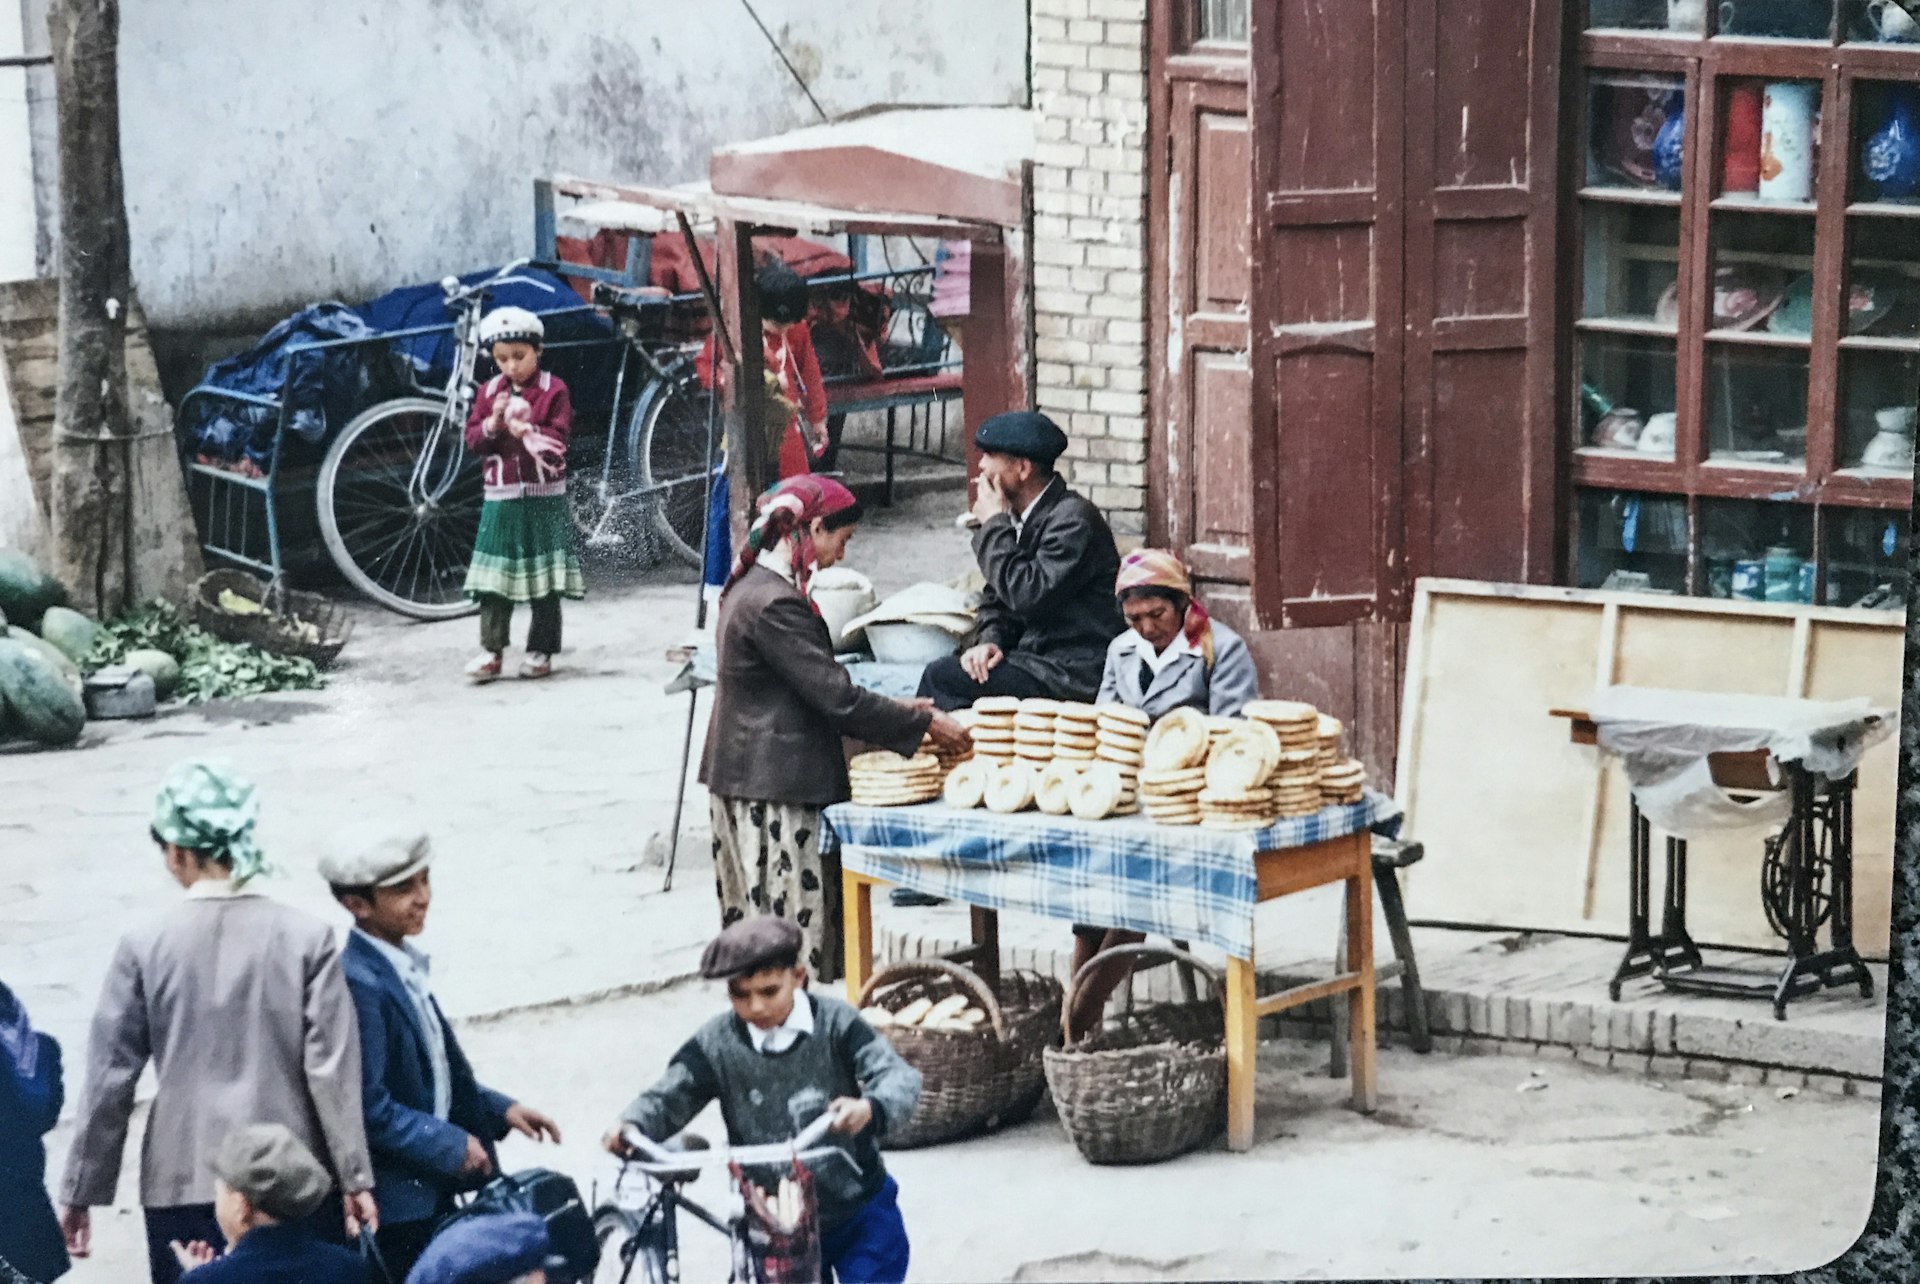 A table is set up on the side of the street and is covered in flat bread. A woman is looking at the bread on display while a child plays in the background and two young boys are on their bikes in the foreground. The stall is set up in front of a building with several windows.